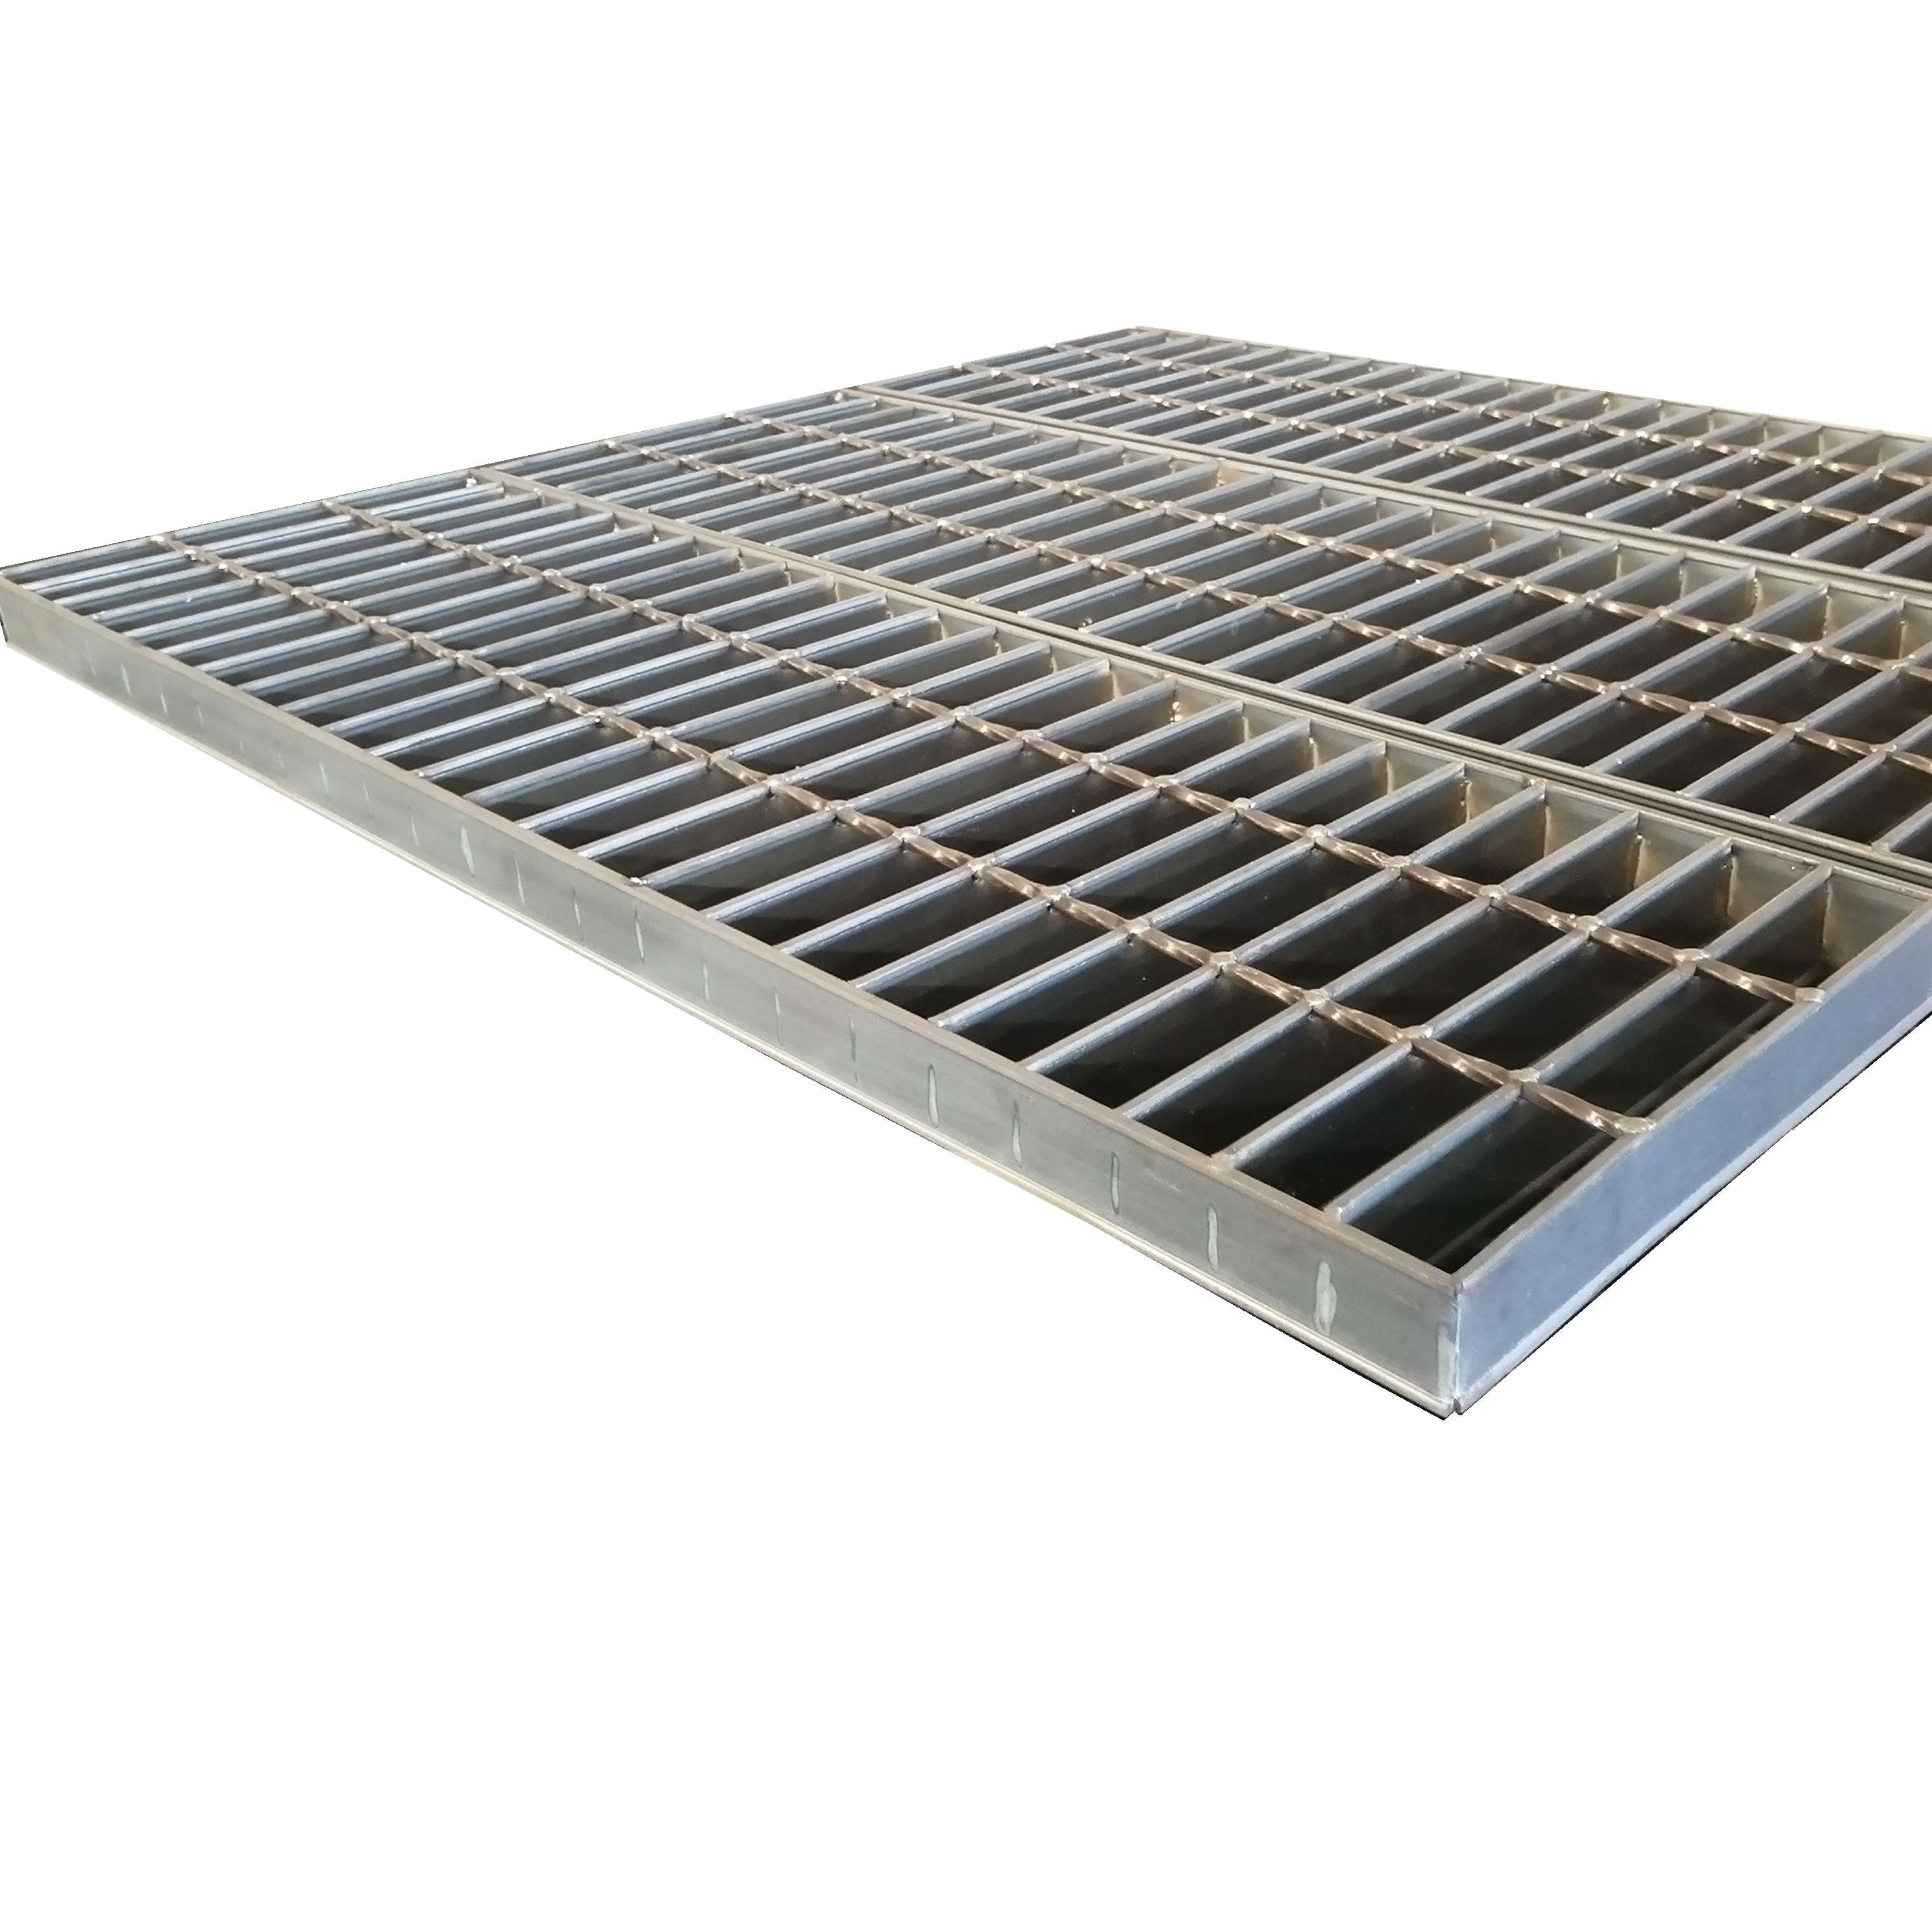 steel driveway grates grating New Arrivals Morden Structural Weight Galvanized Standard Stainless Steel Grating